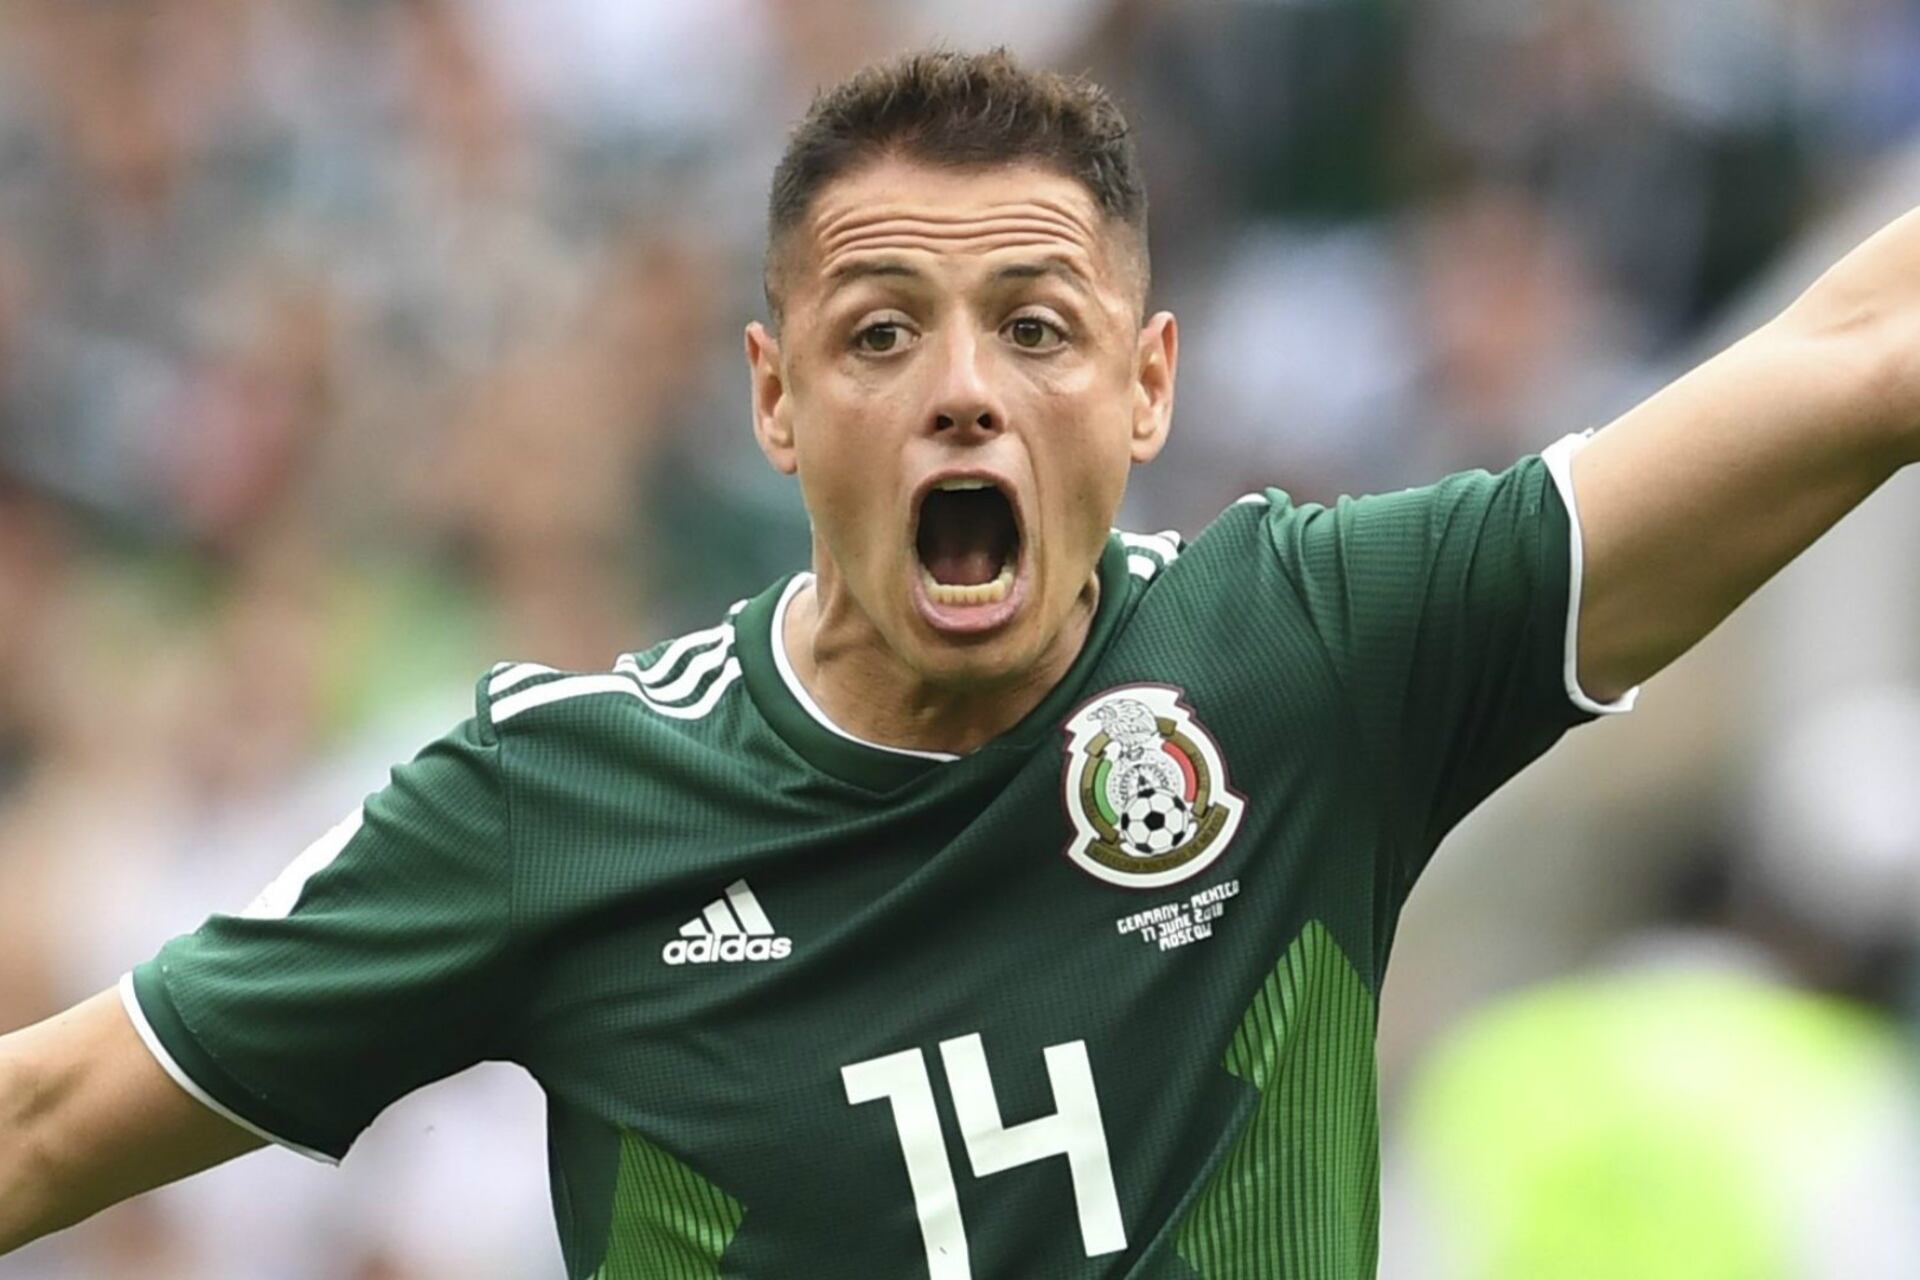 The record that Javier Chicharito Hernández will try and break in Catar 2022 with the Mexican National Team